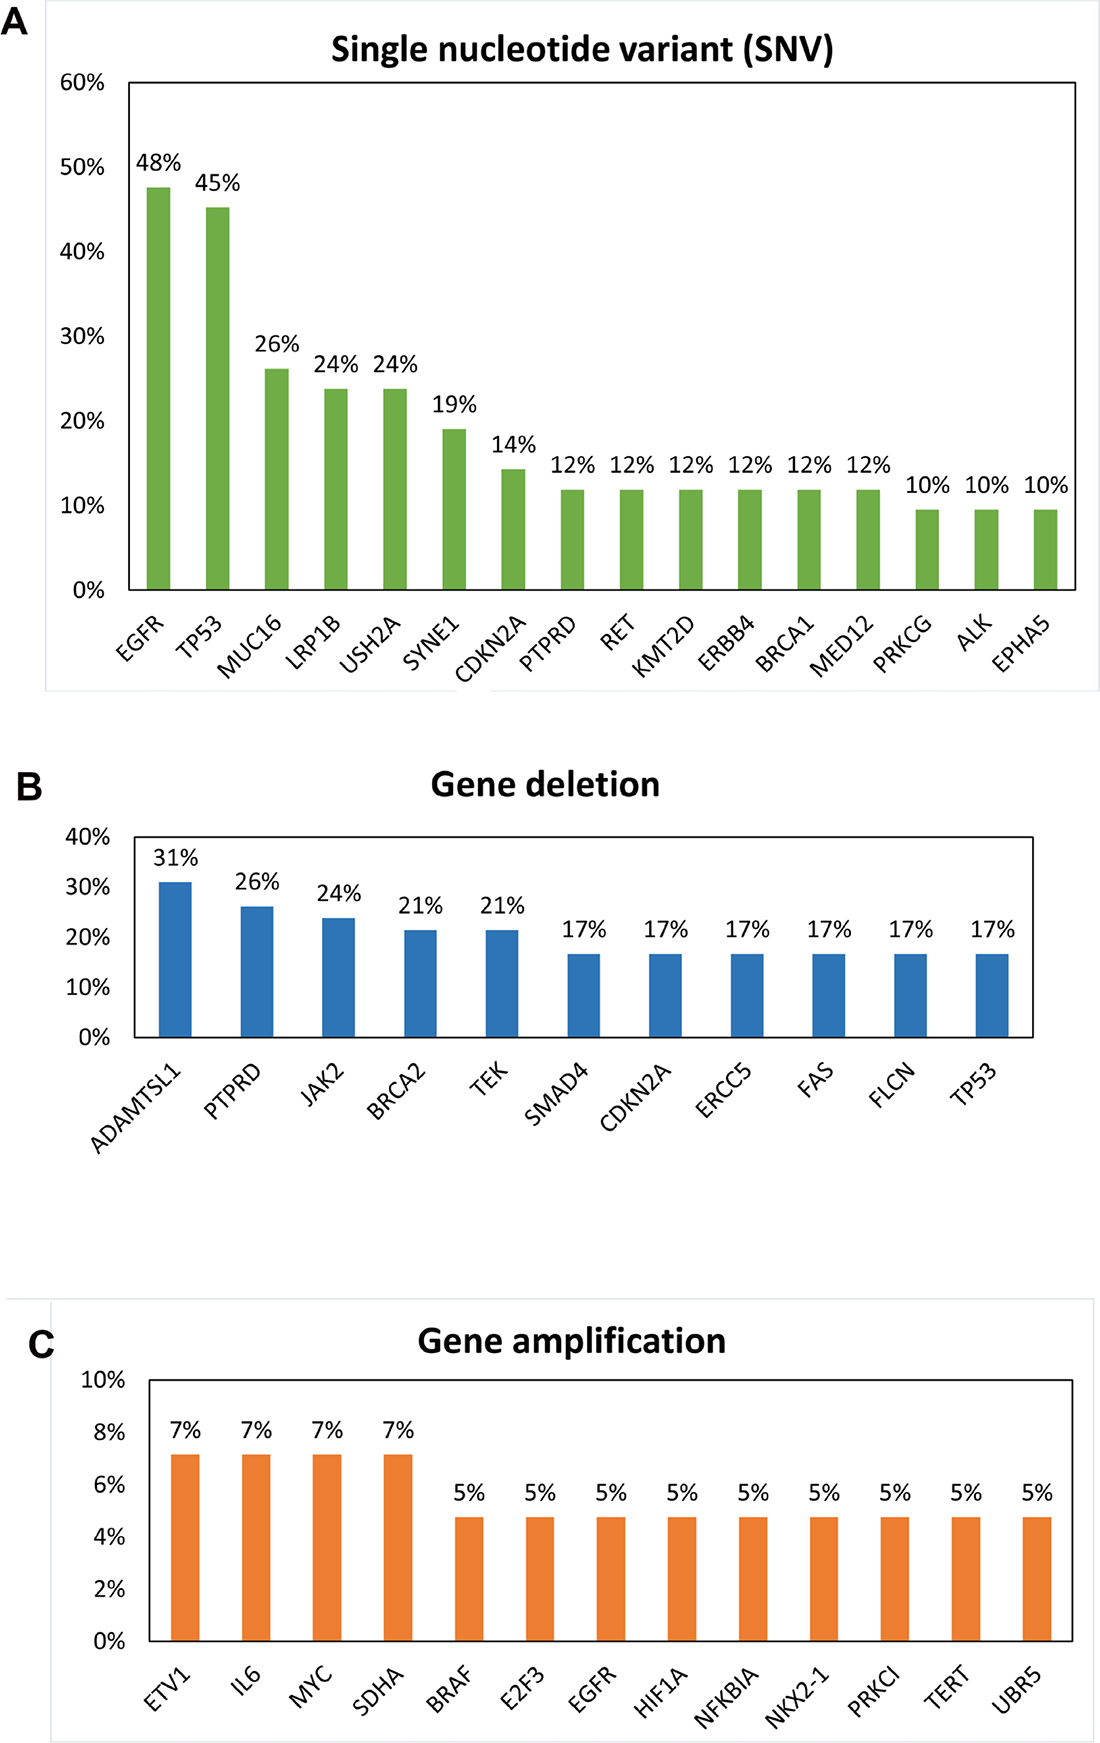 Frequency of genomic alterations in each gene.